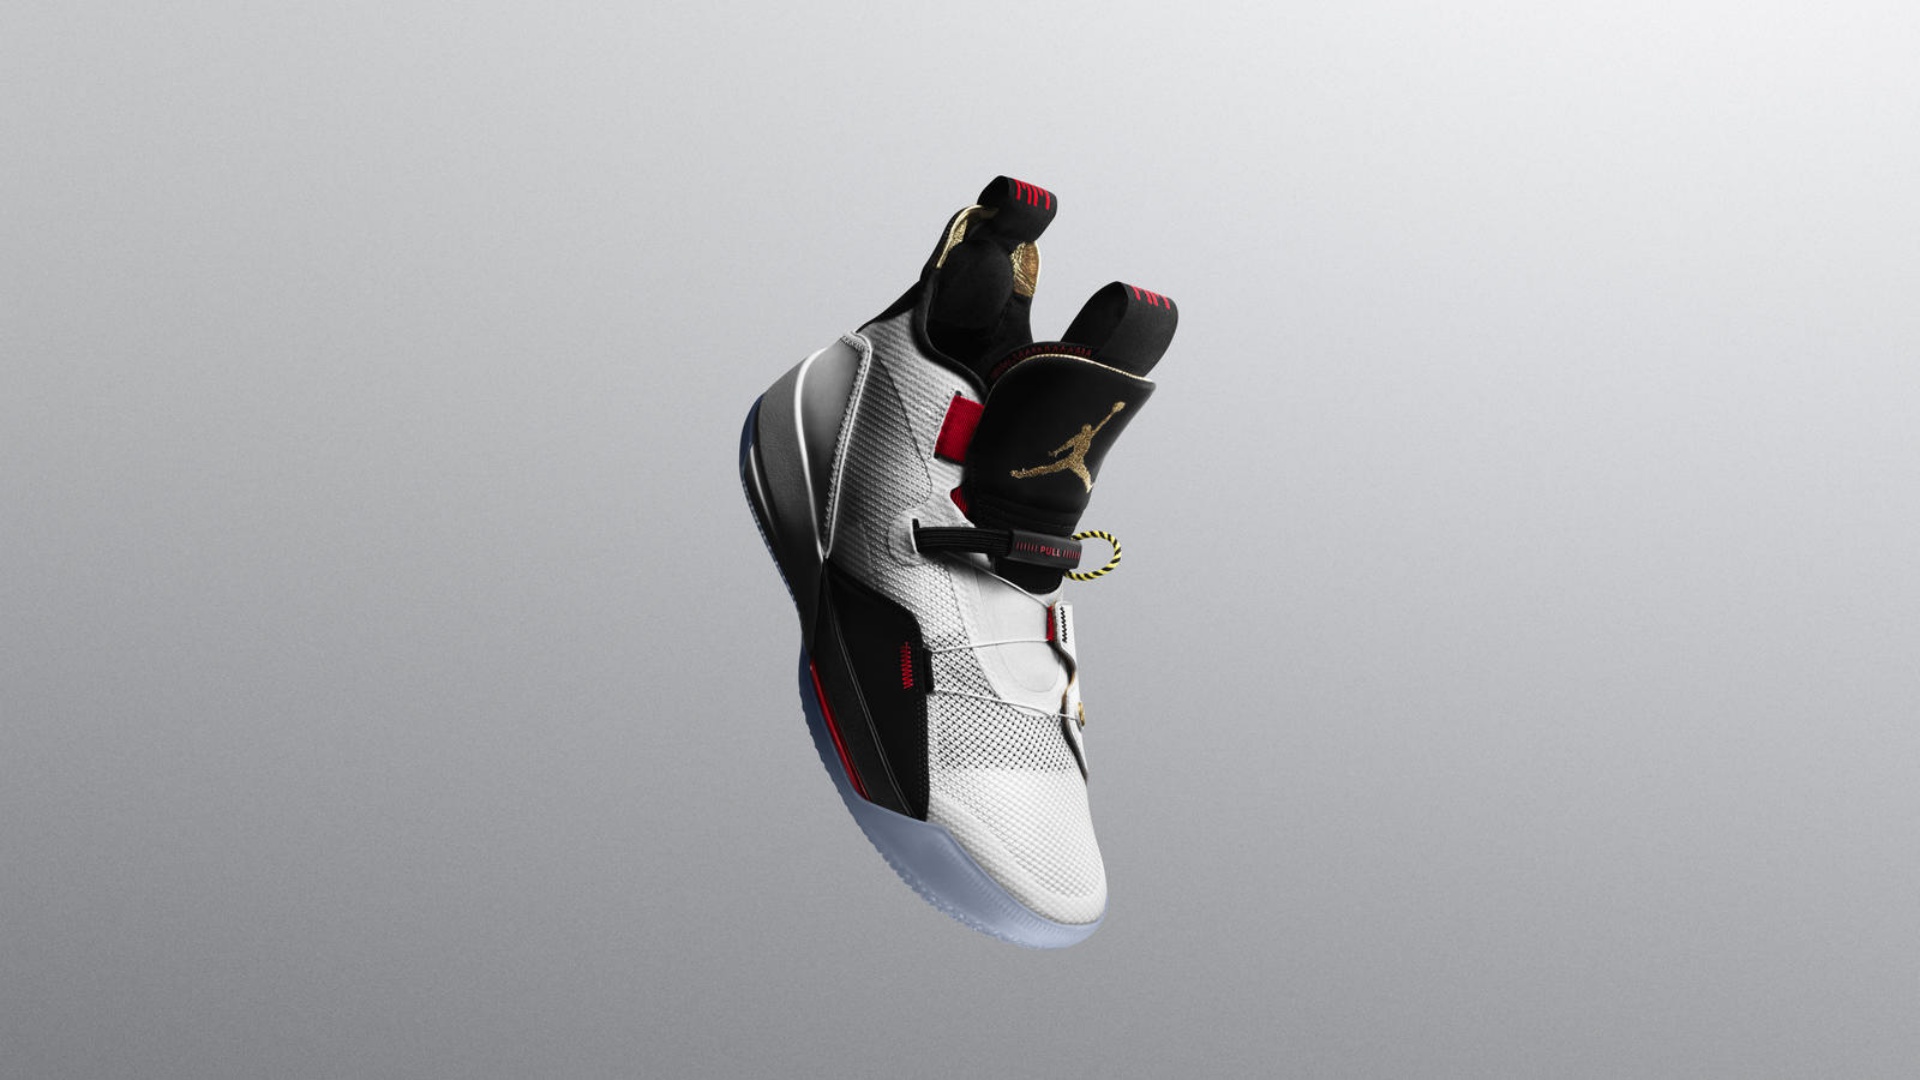 Self-tightening laces added to new Jordan XXXIII sneakers - htxt.africa